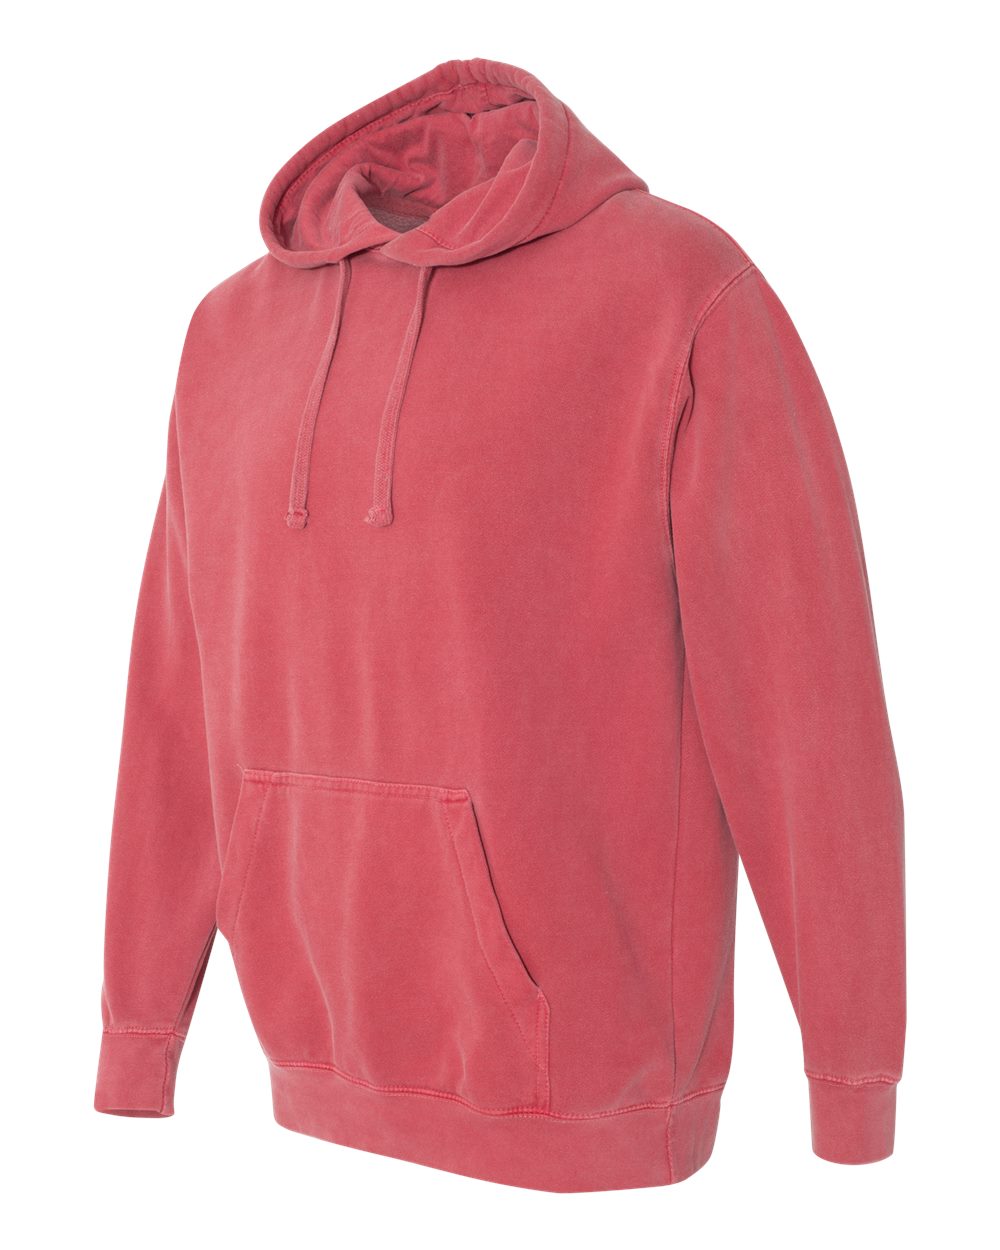 Comfort Colors 1567 - Garment Dyed Hooded Pullover Sweatshirt